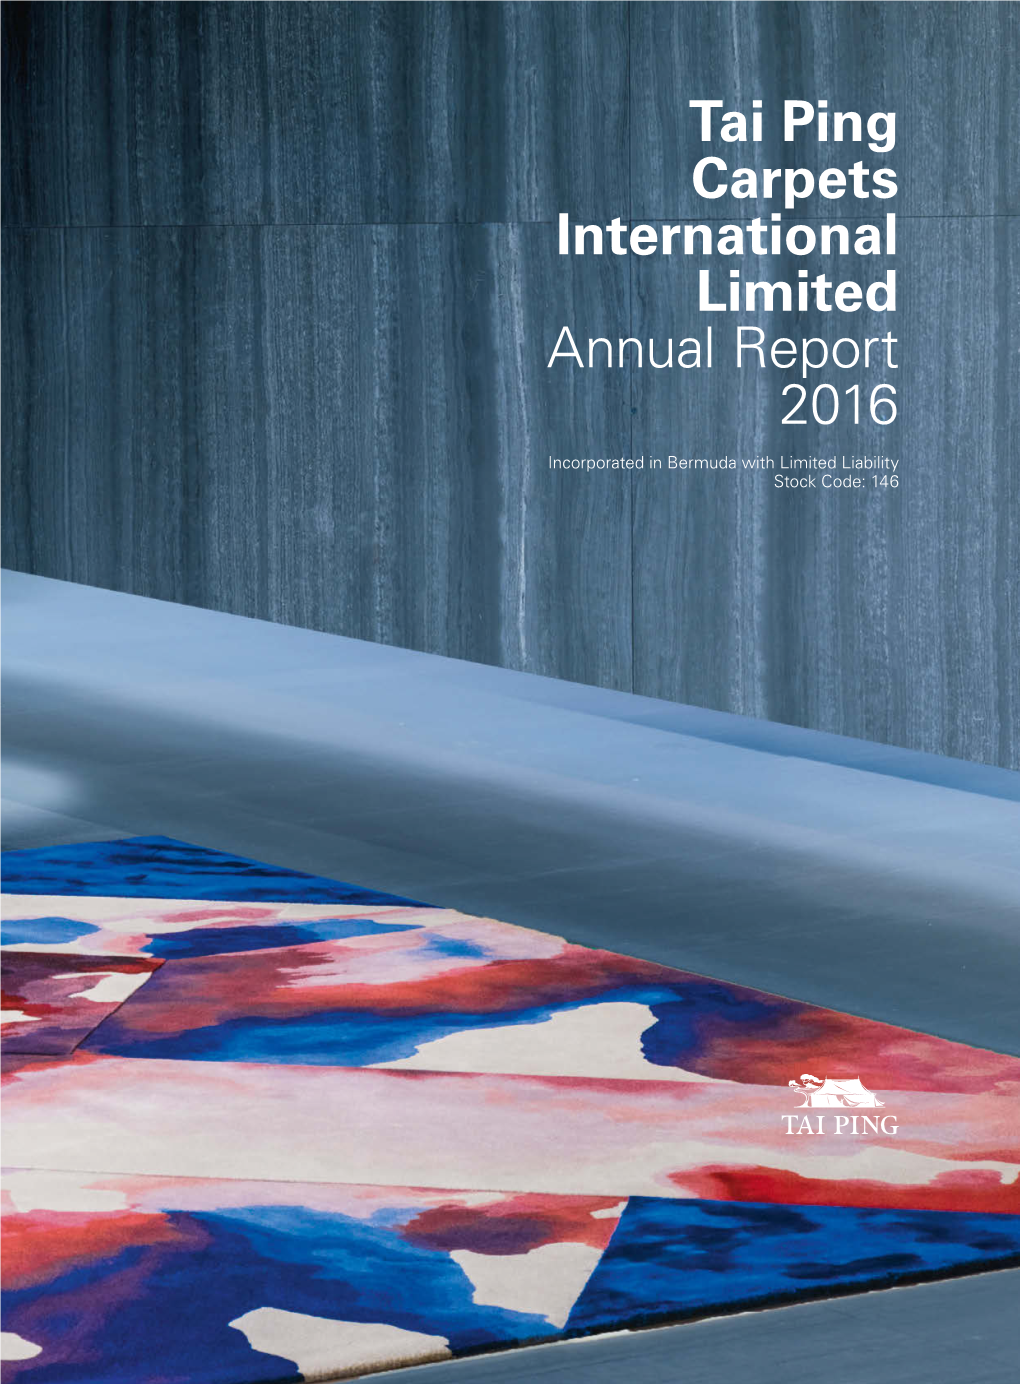 Tai Ping Carpets International Limited Annual Report 2016